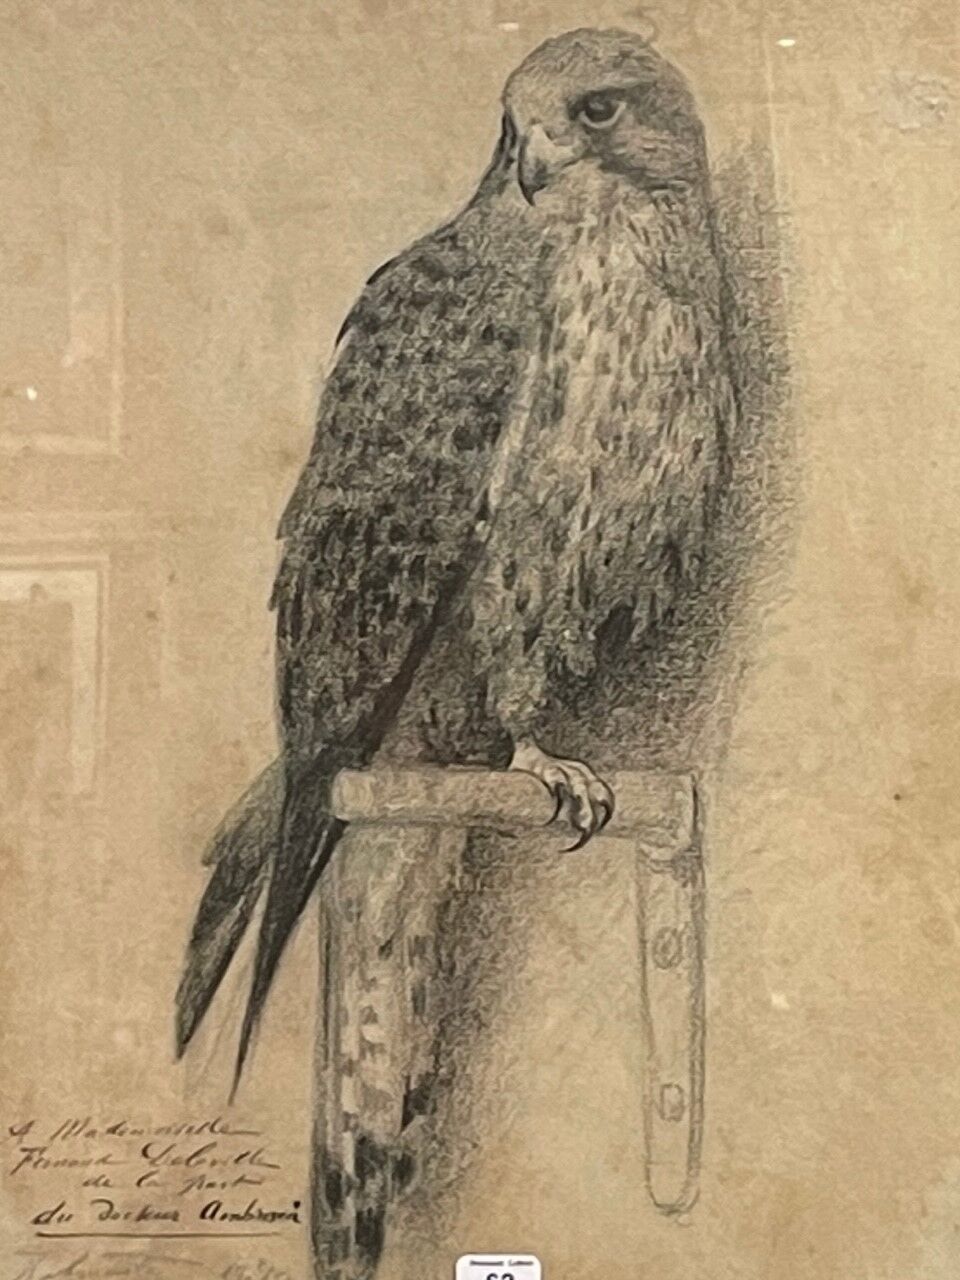 Null School of the XIXth century

Perched Falcon

Drawing dedicated to Mademoise&hellip;